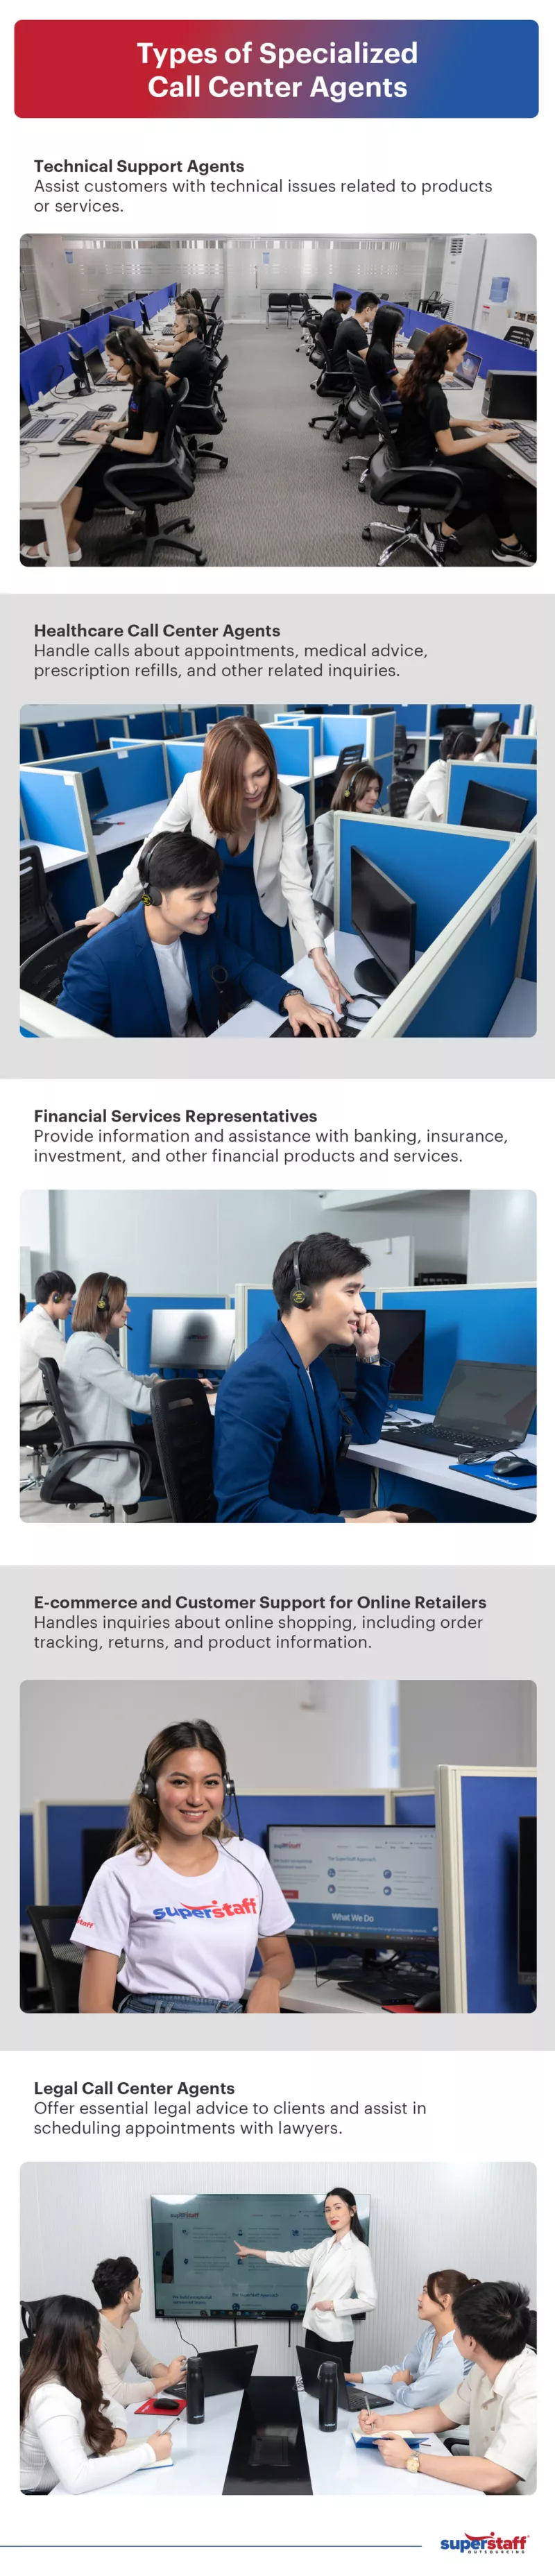 An infographic showing the different kinds of specialized call center agents